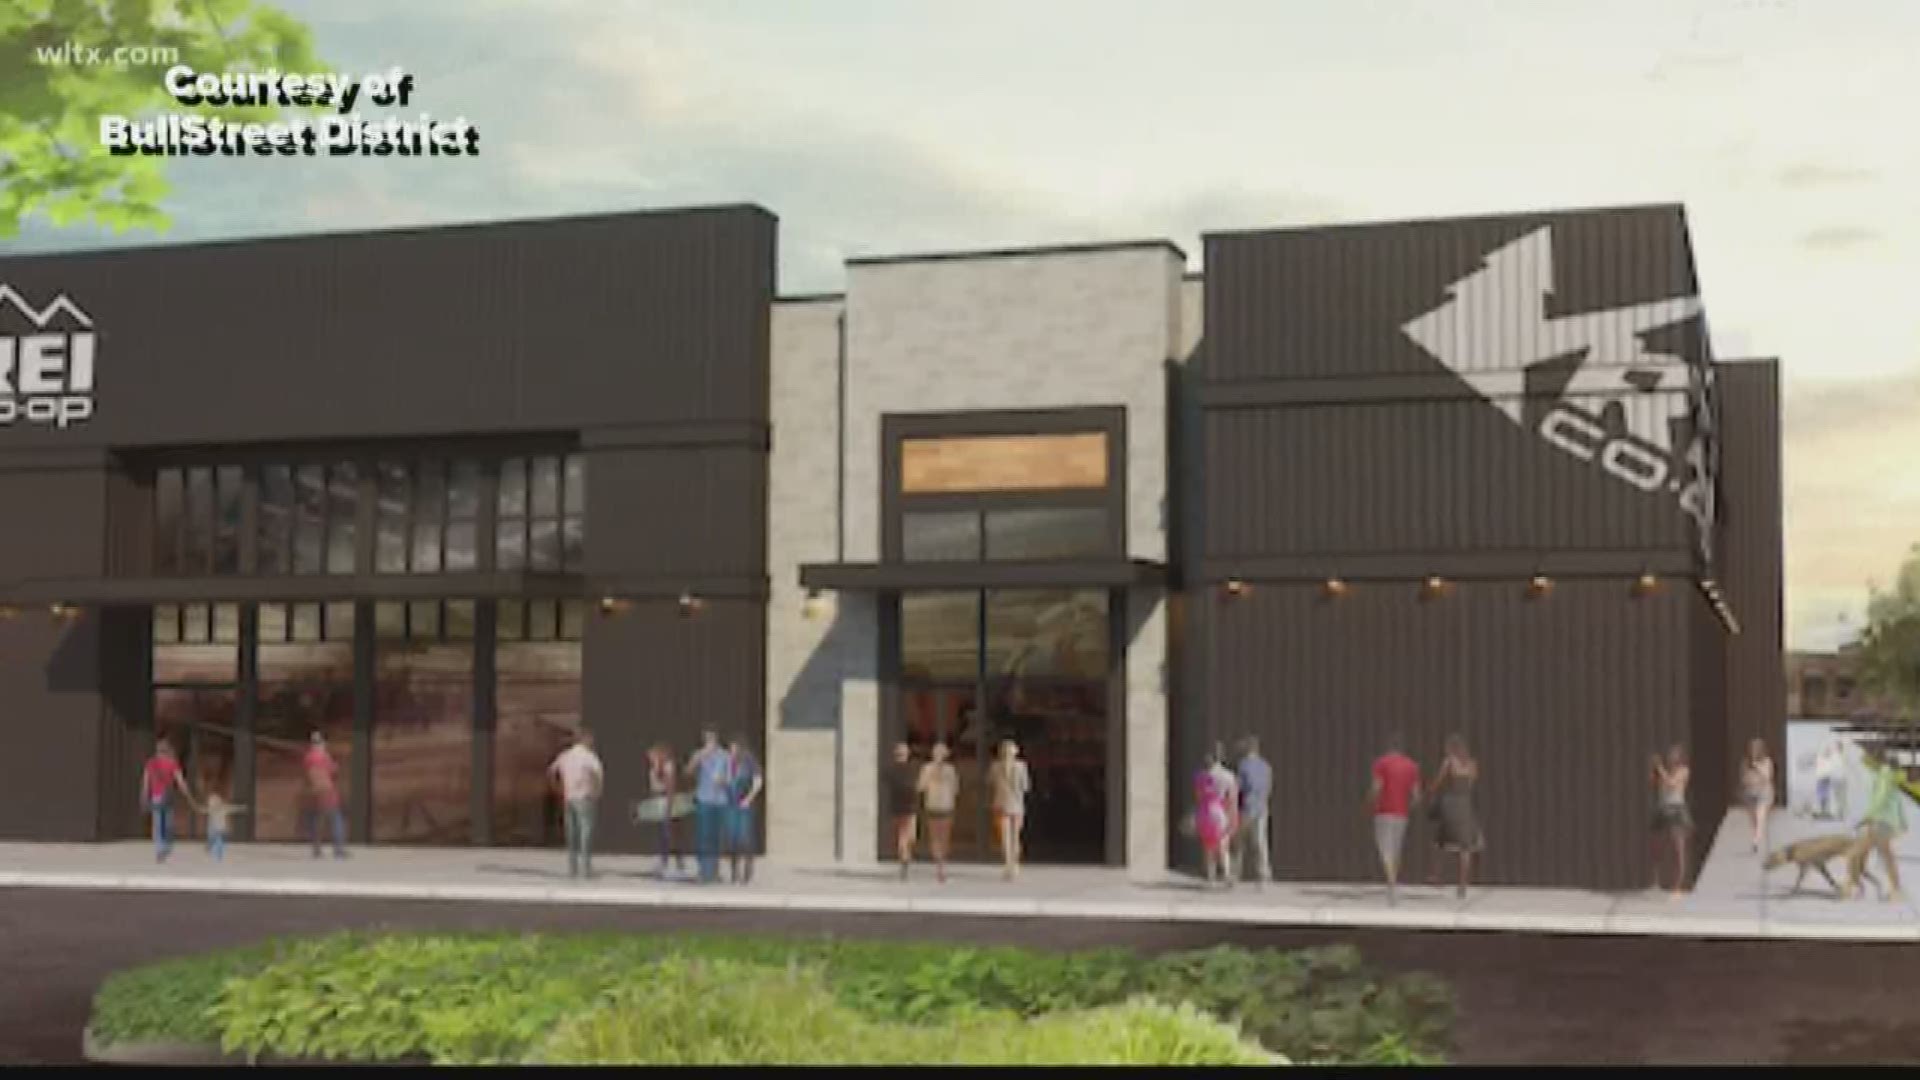 The REI Co-op is currently the biggest project and is scheduled to be open next year.